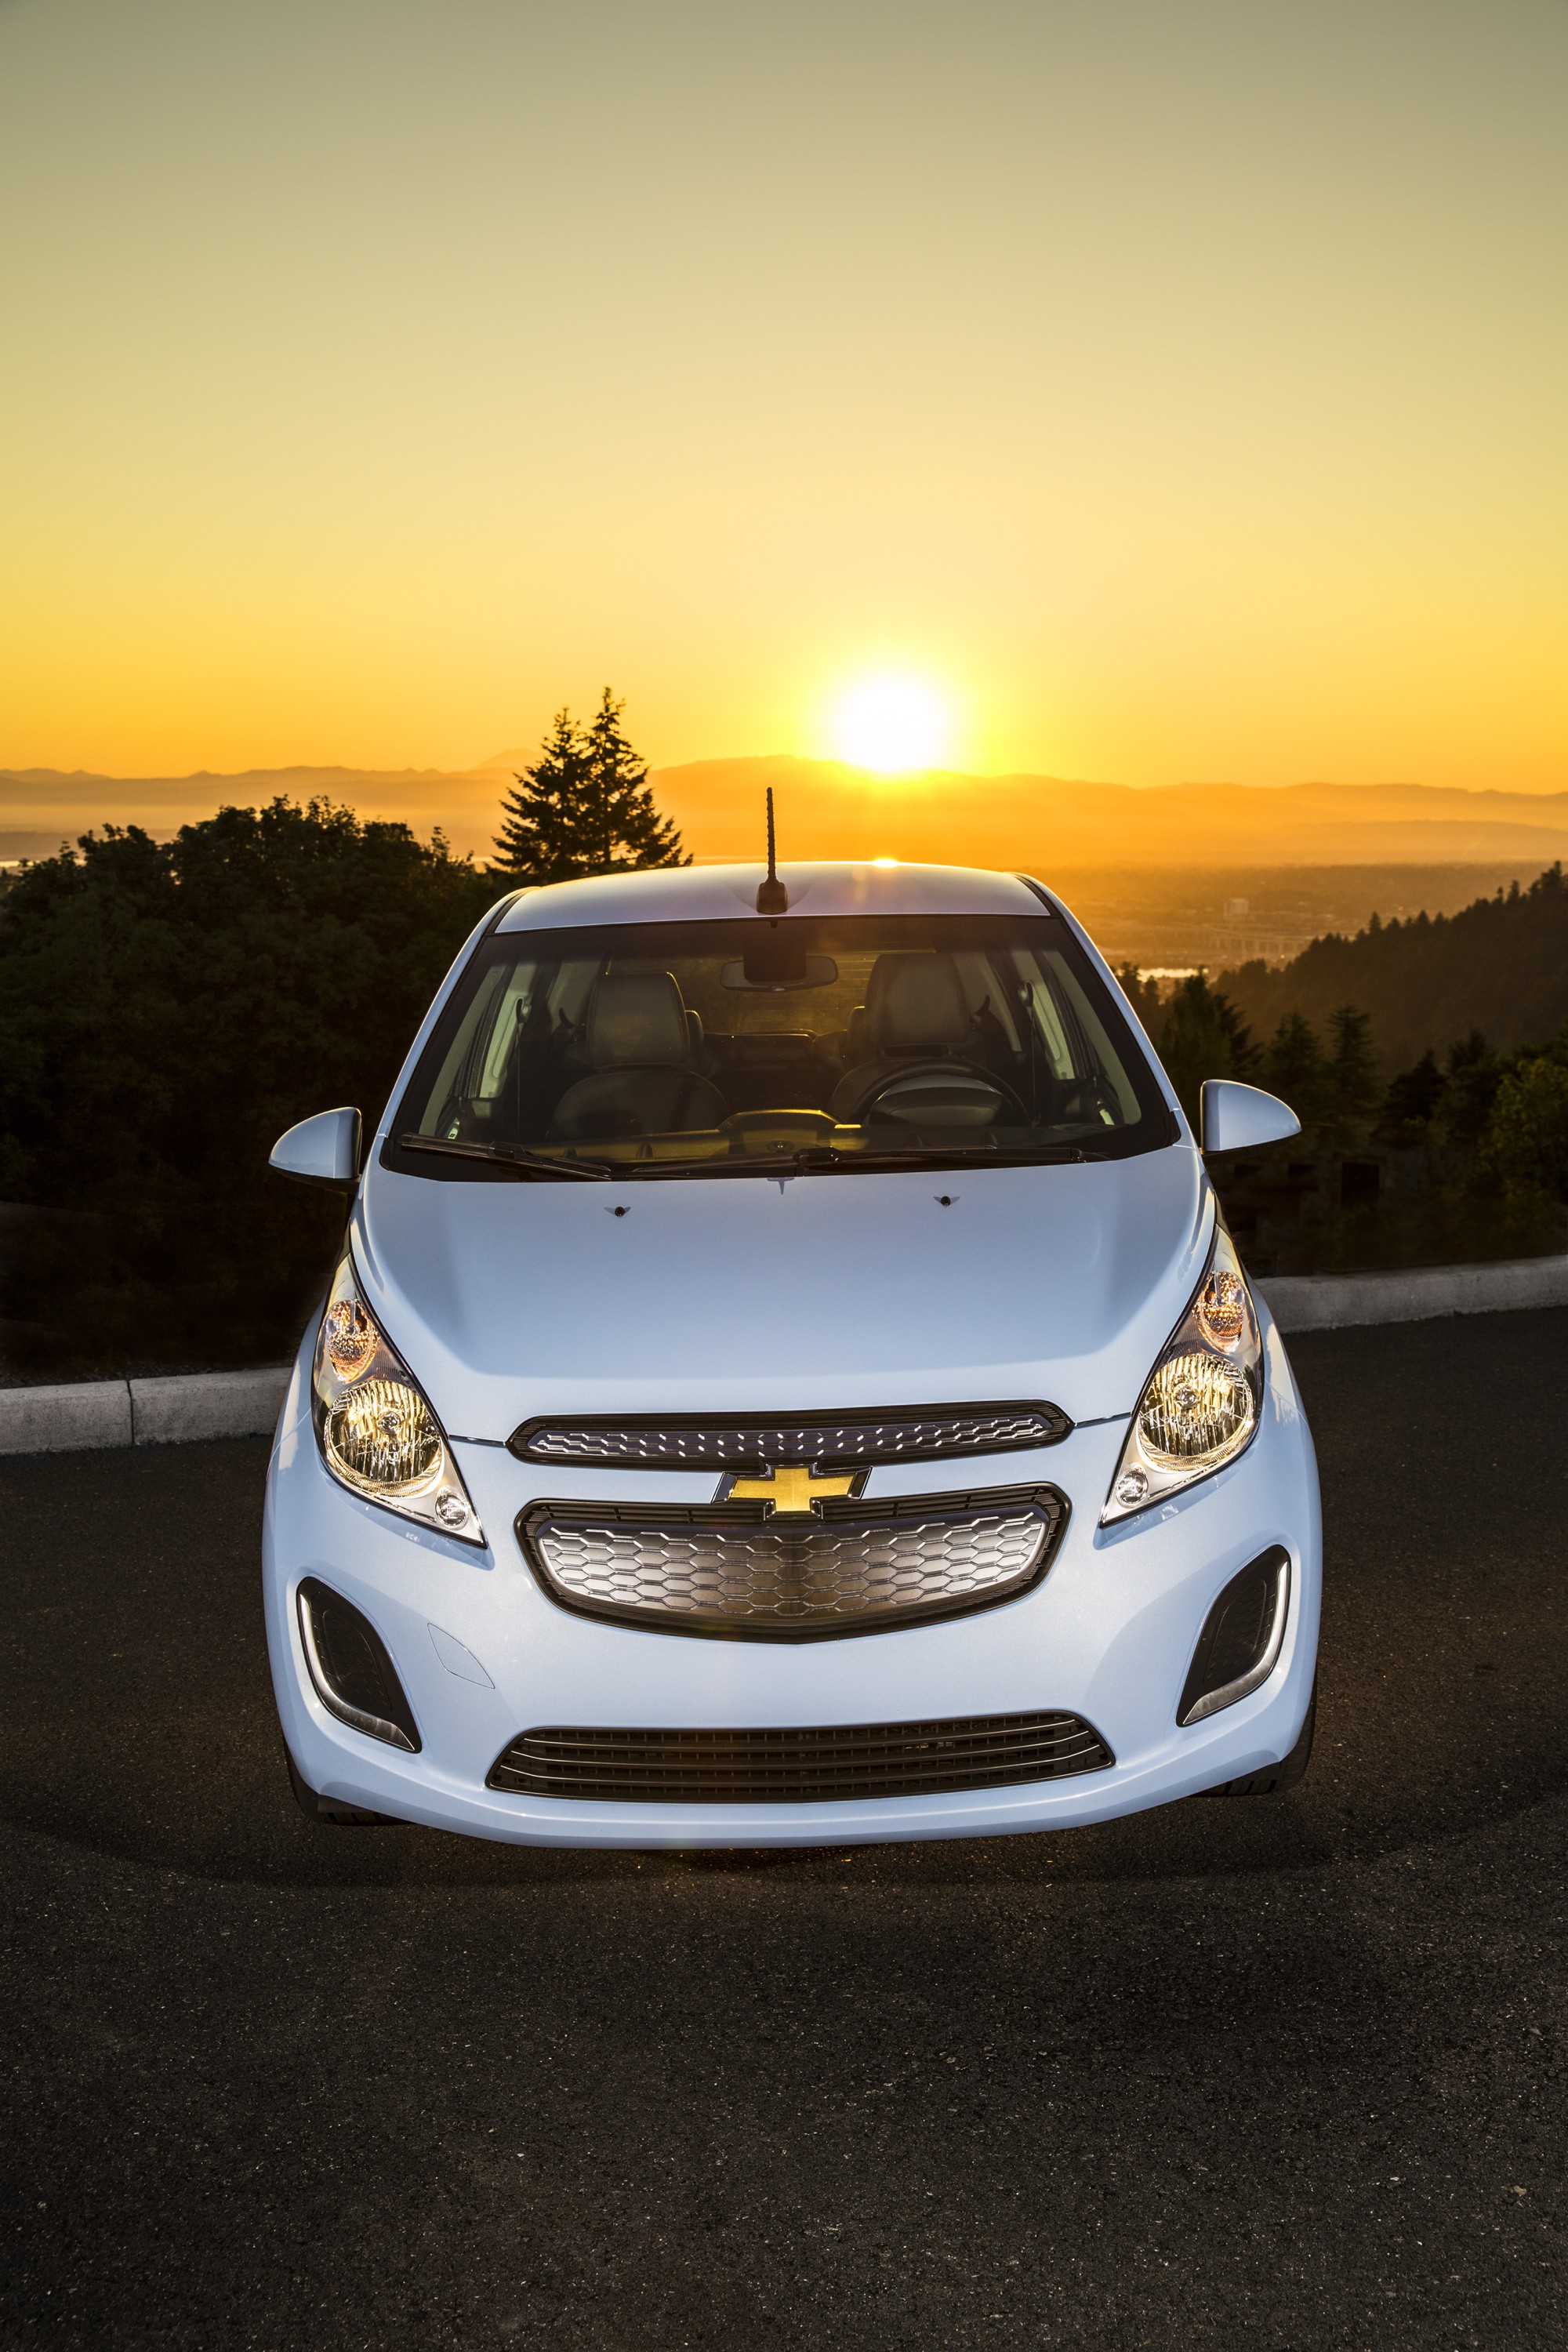 Chevrolet Spark hd restyling